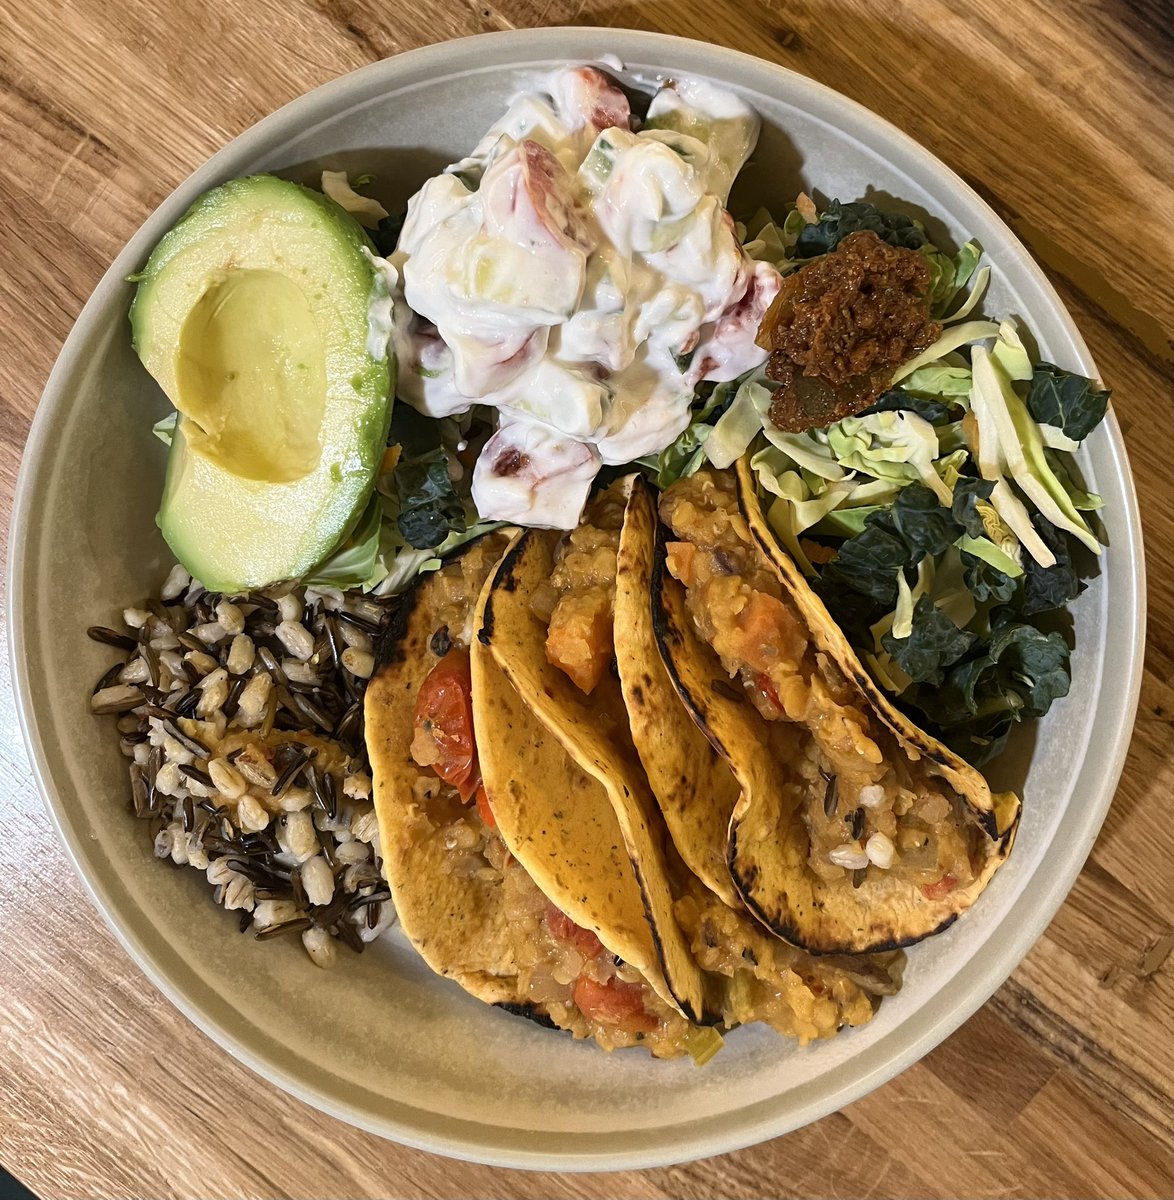 Deception Pass Whidbey Island WA. Taco Tuesday: Red Lentil Masala Tacos, Barley-Spelt-Wild Rice, Riata, Cabbage, Spinach and Lime Pickle. Yum